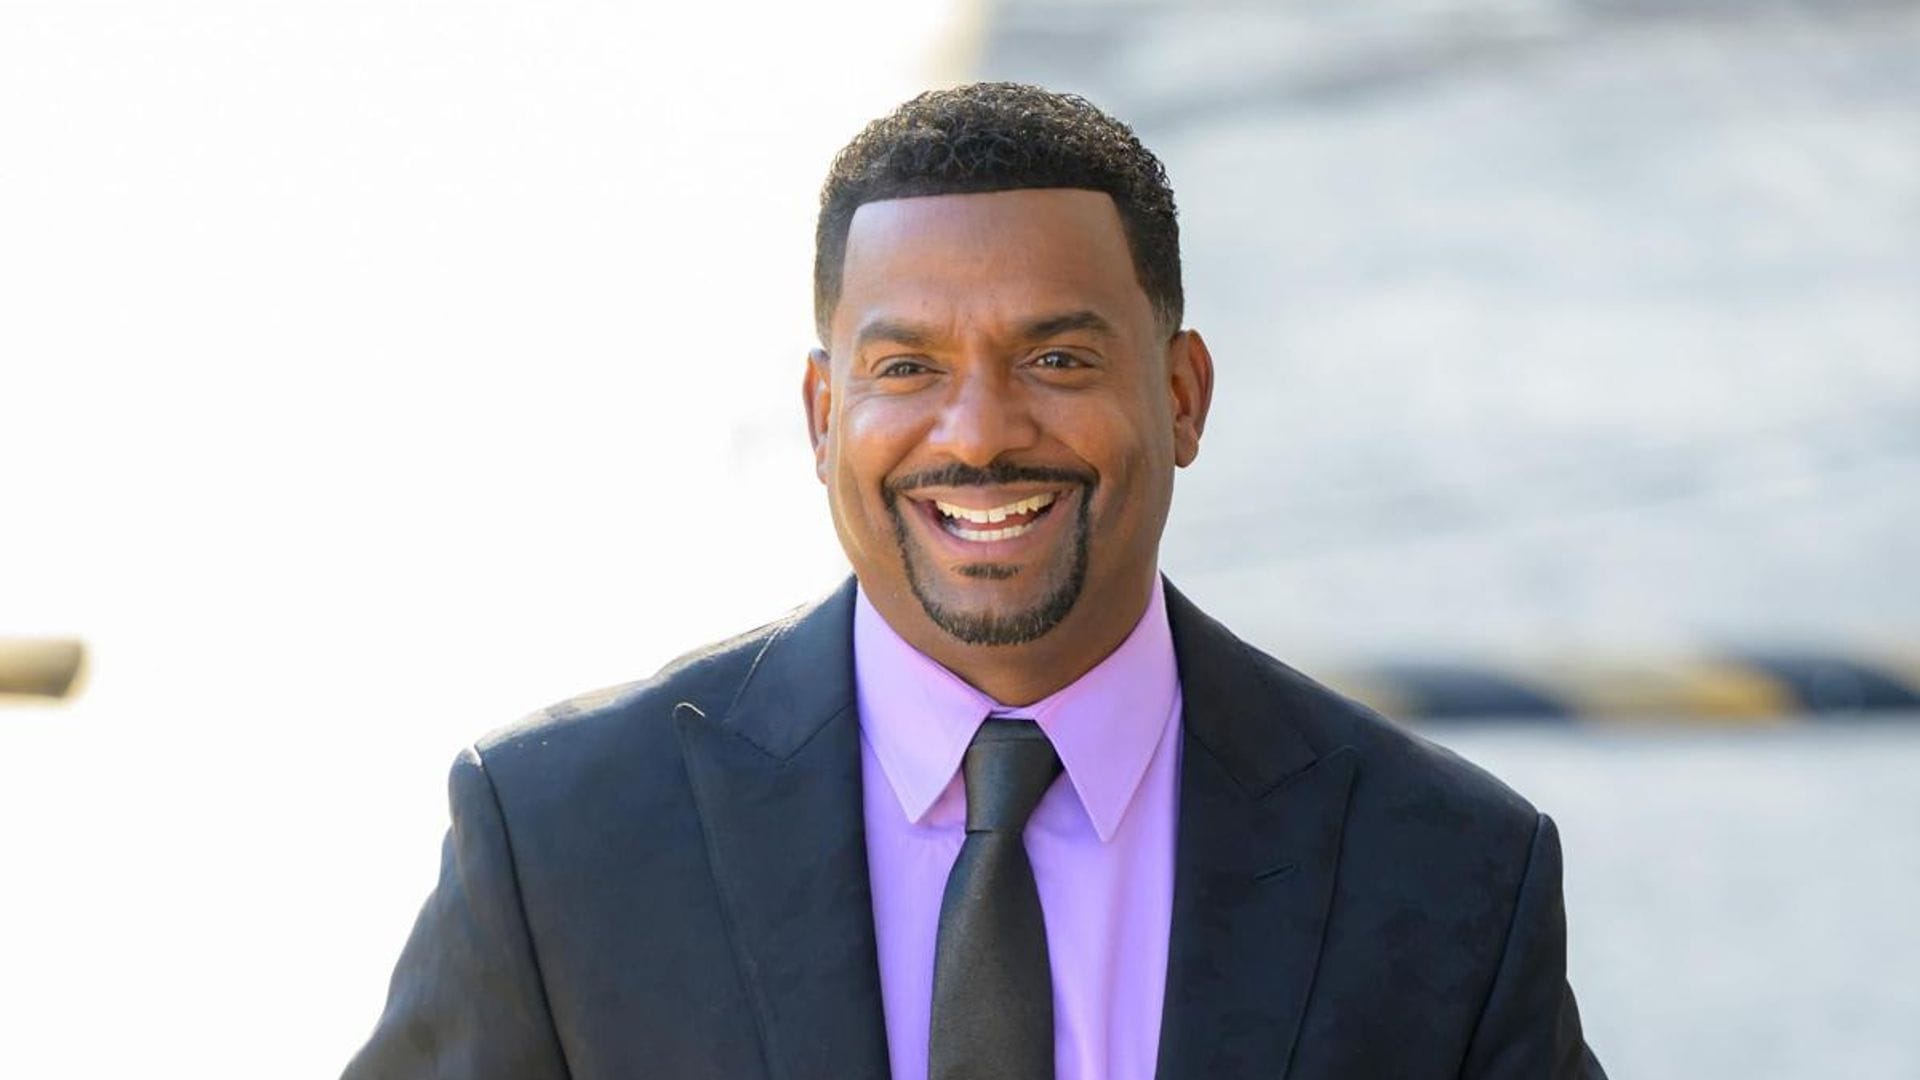 Alfonso Ribeiro gives an update on his daughter’s health after her frightening accident